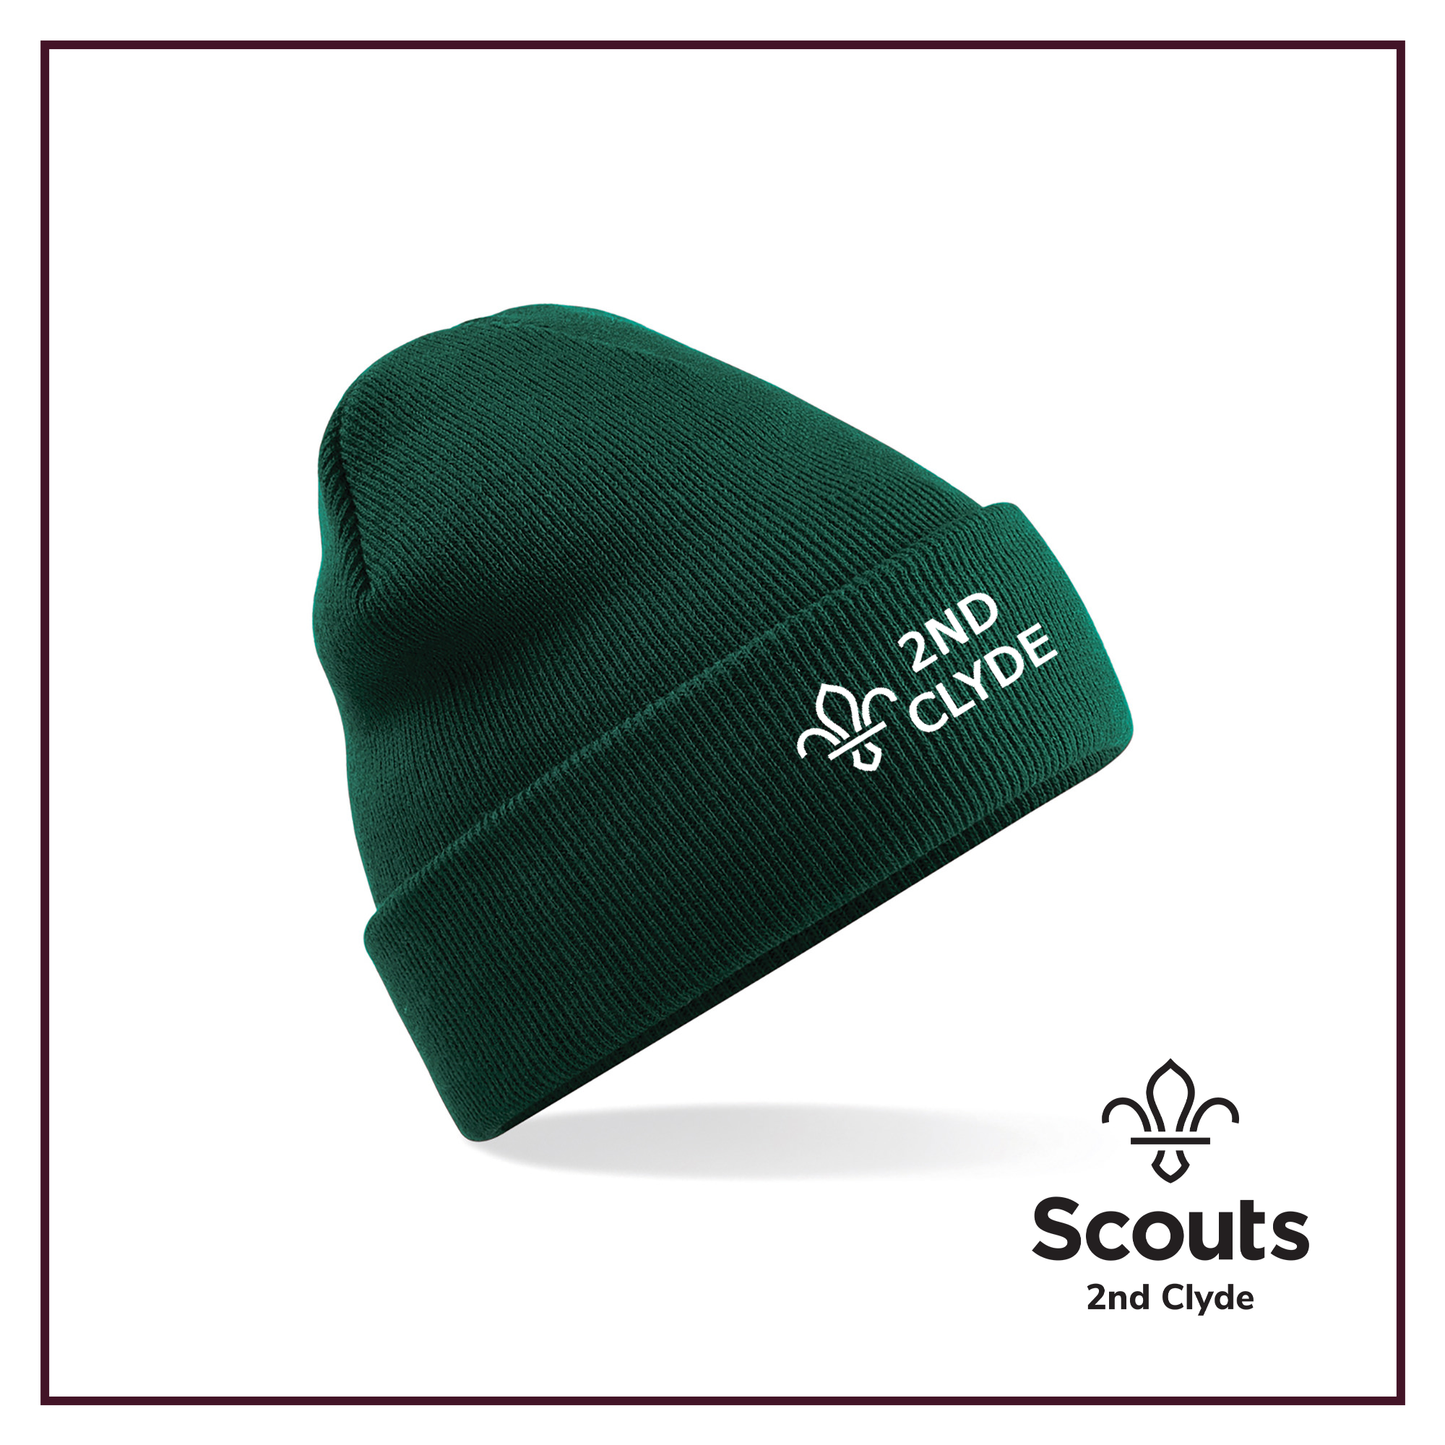 2nd Clyde Scouts - Embroidered Beanie